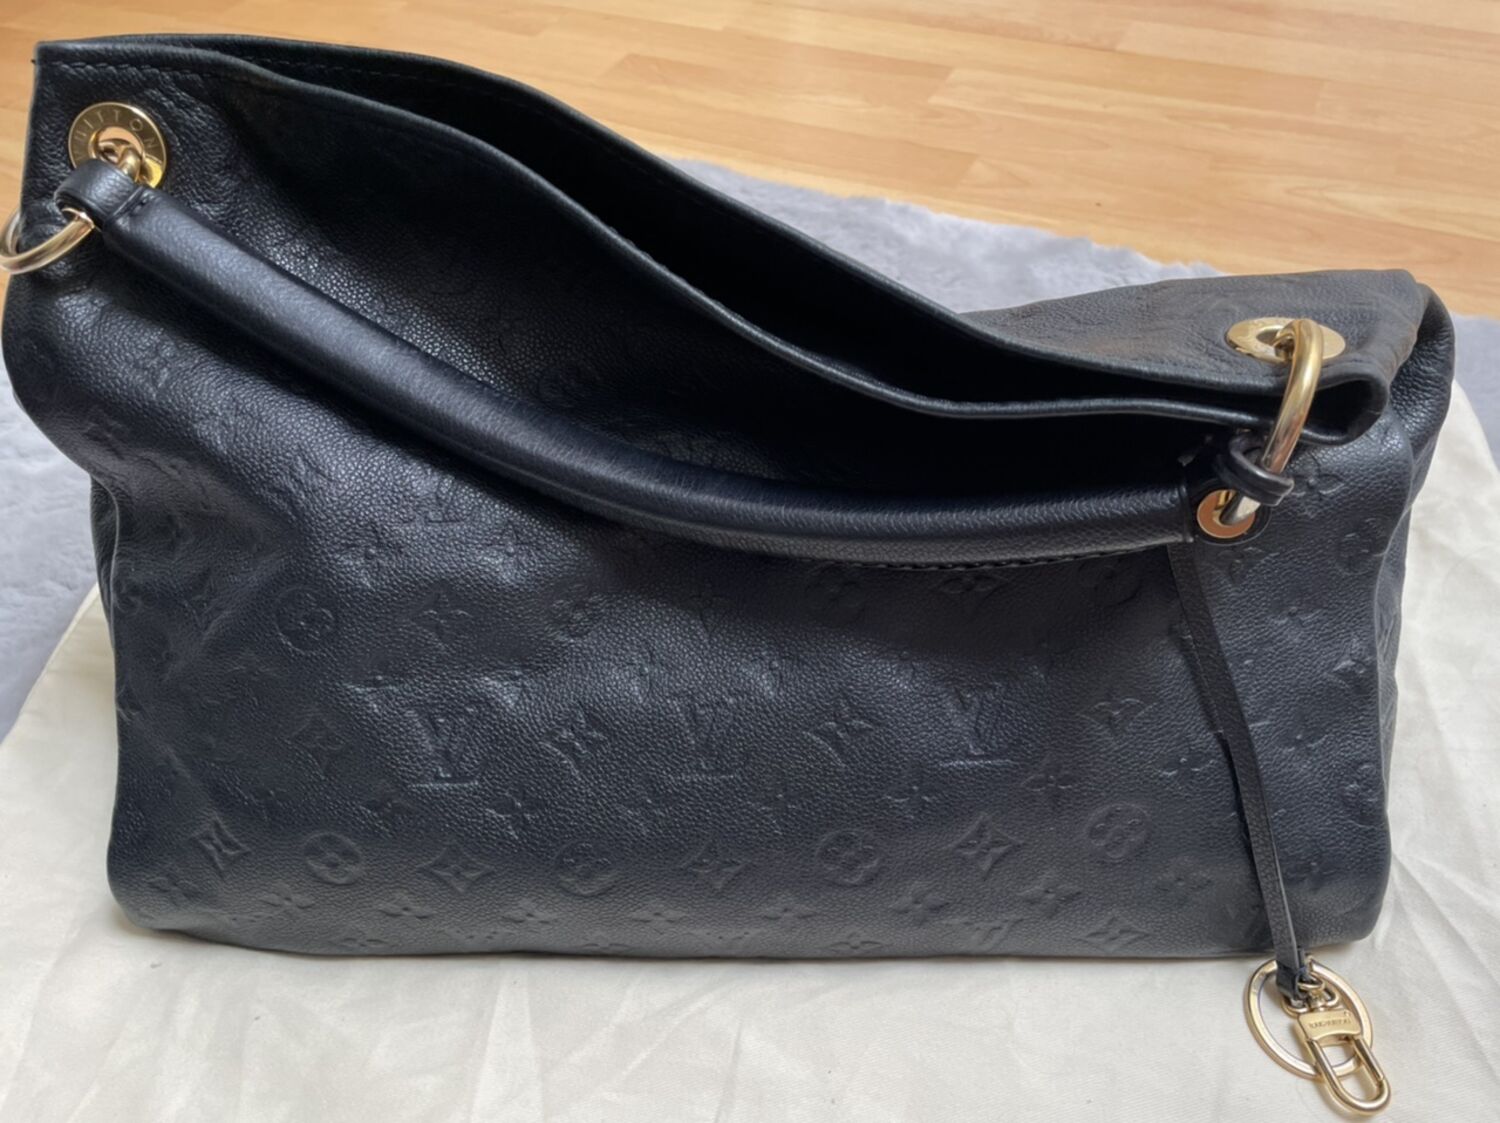 Louis Vuitton Artsy Navy Leather Shoulder Bag (Pre-Owned)